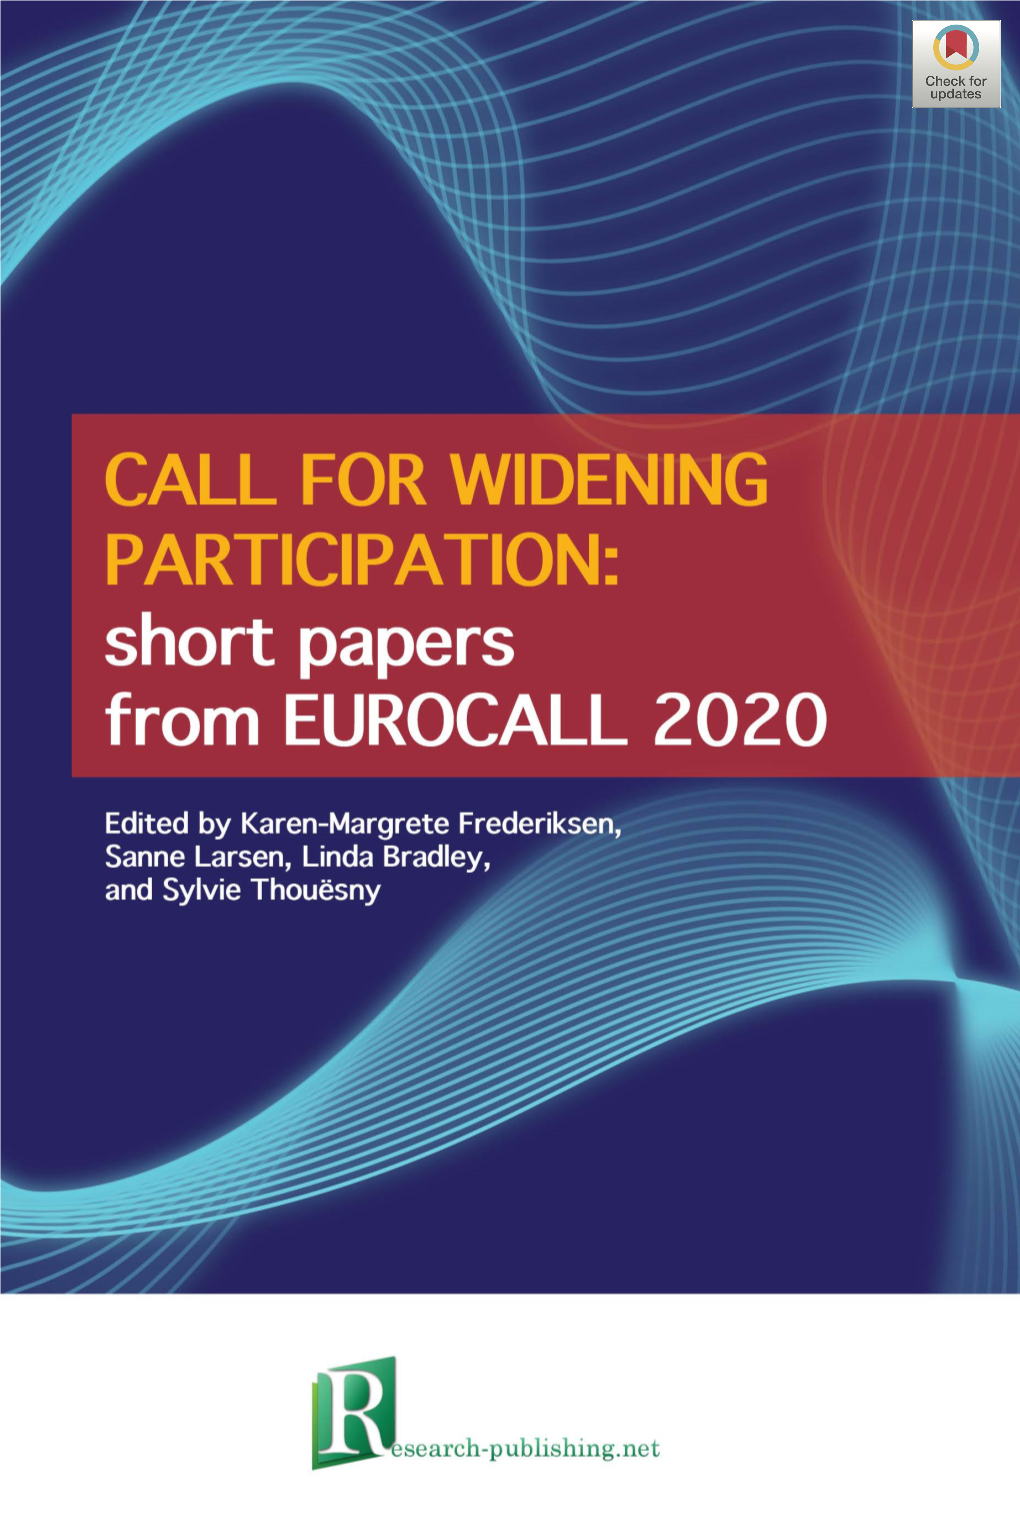 CALL for Widening Participation: Short Papers from EUROCALL 2020